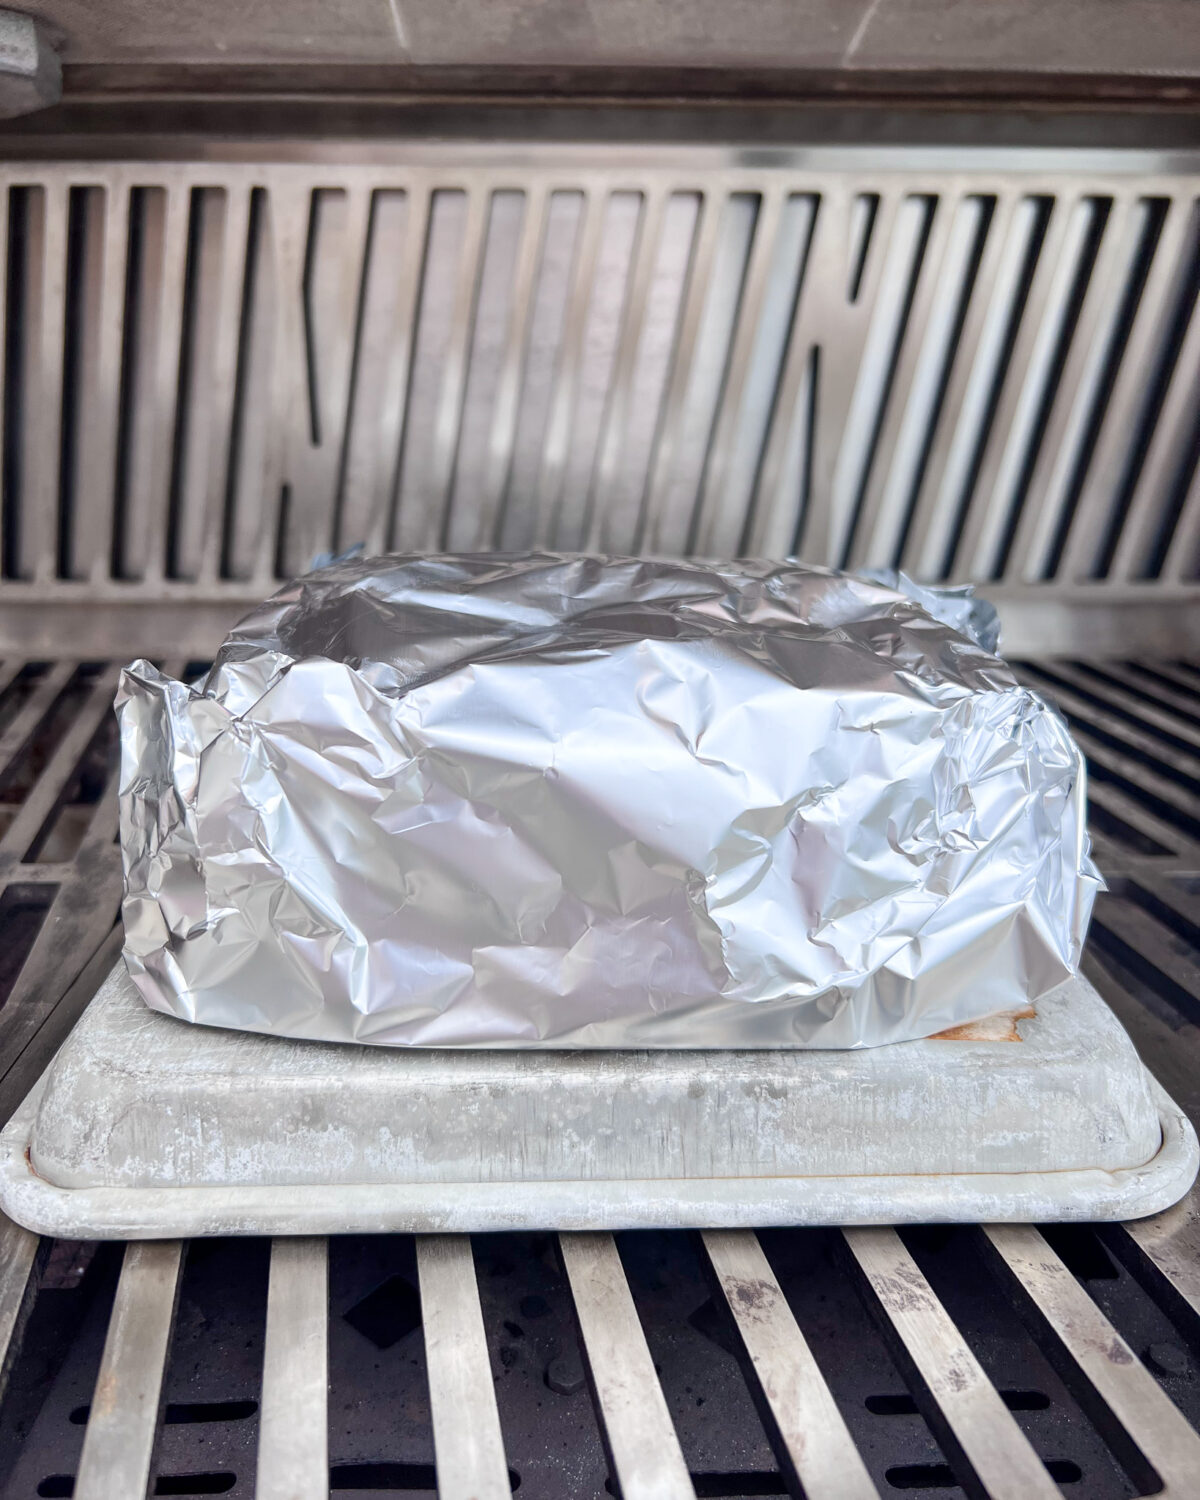 Wrap the sliders in aluminum foil and place on a sheet pan.